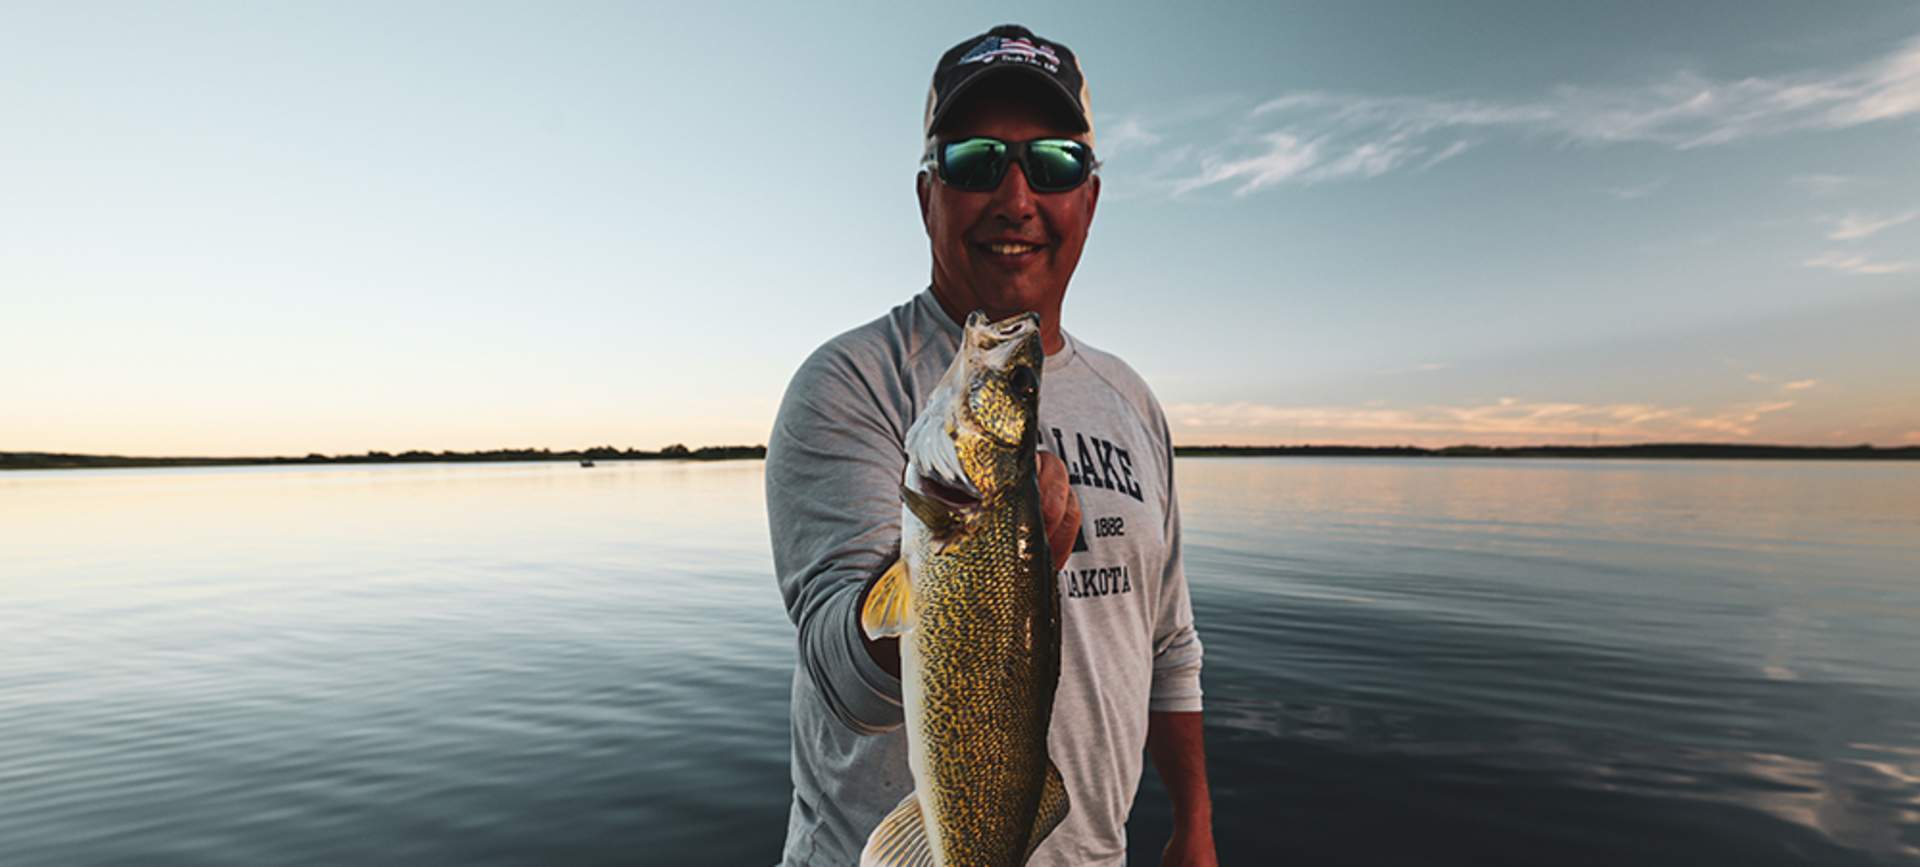 DLFR 'No-Secrets': Bounce and Spin! – Devils Lake Fishing Report